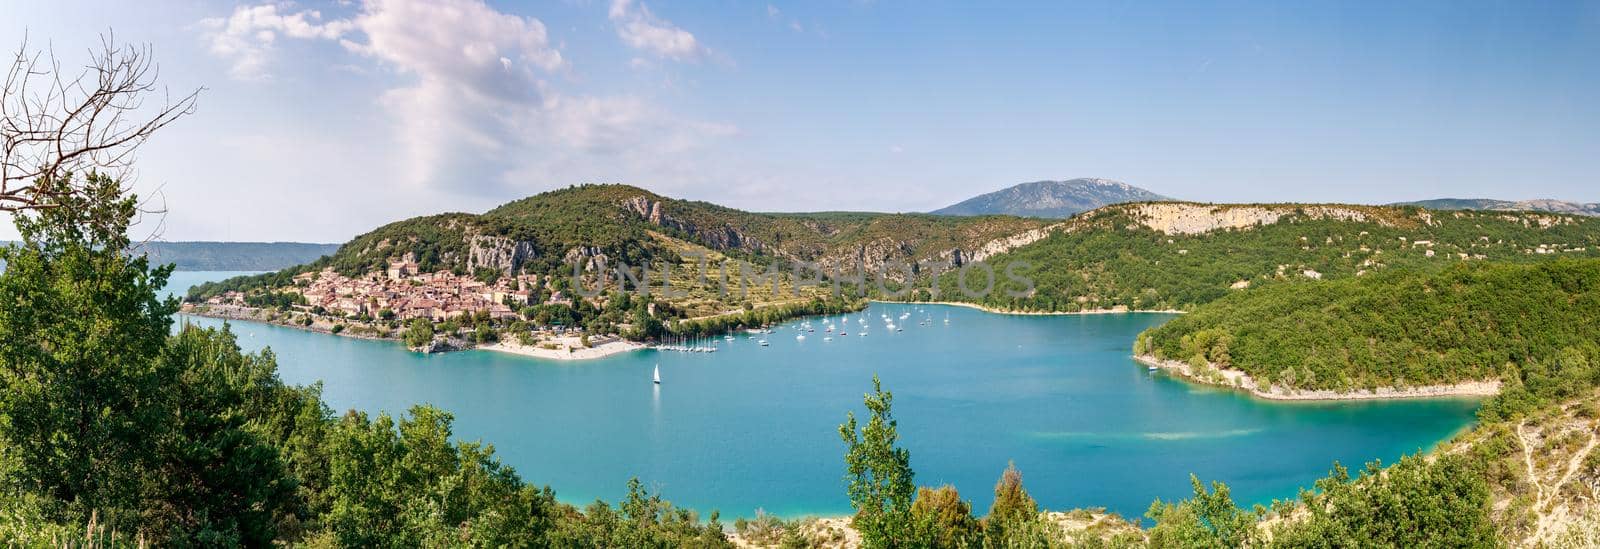 The city on the bank of the artificial lake in France, Provence, lake Saint Cross, gorge Verdone, azure water of the lake and slopes of mountains on a background, small boats, vacations place. High quality photo